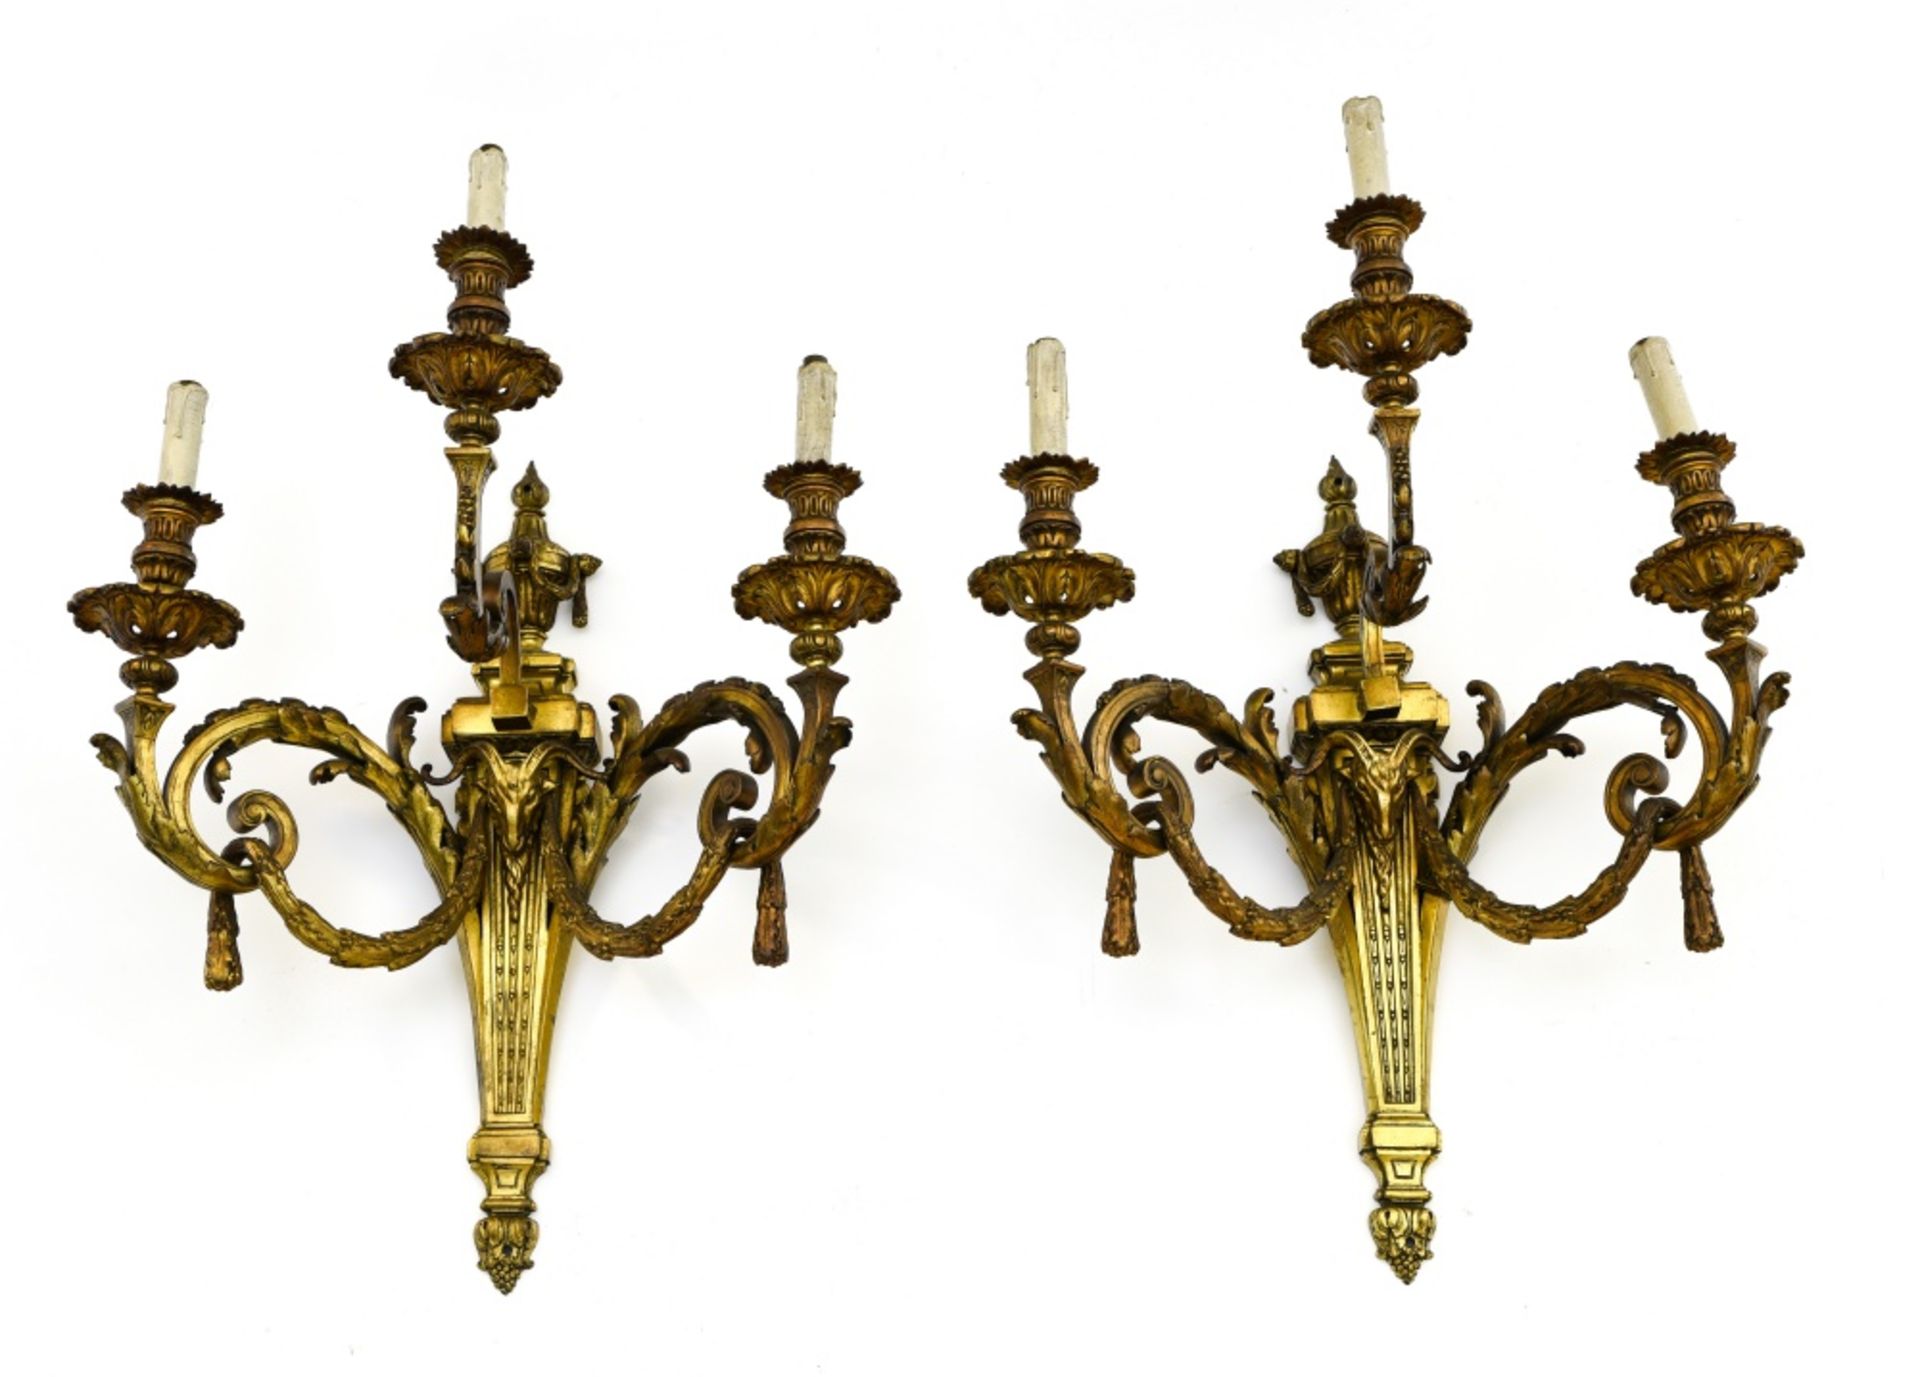 Louis XVI style work Large pair of sconces, Bronze, decorated with rams' heads and garlands, based